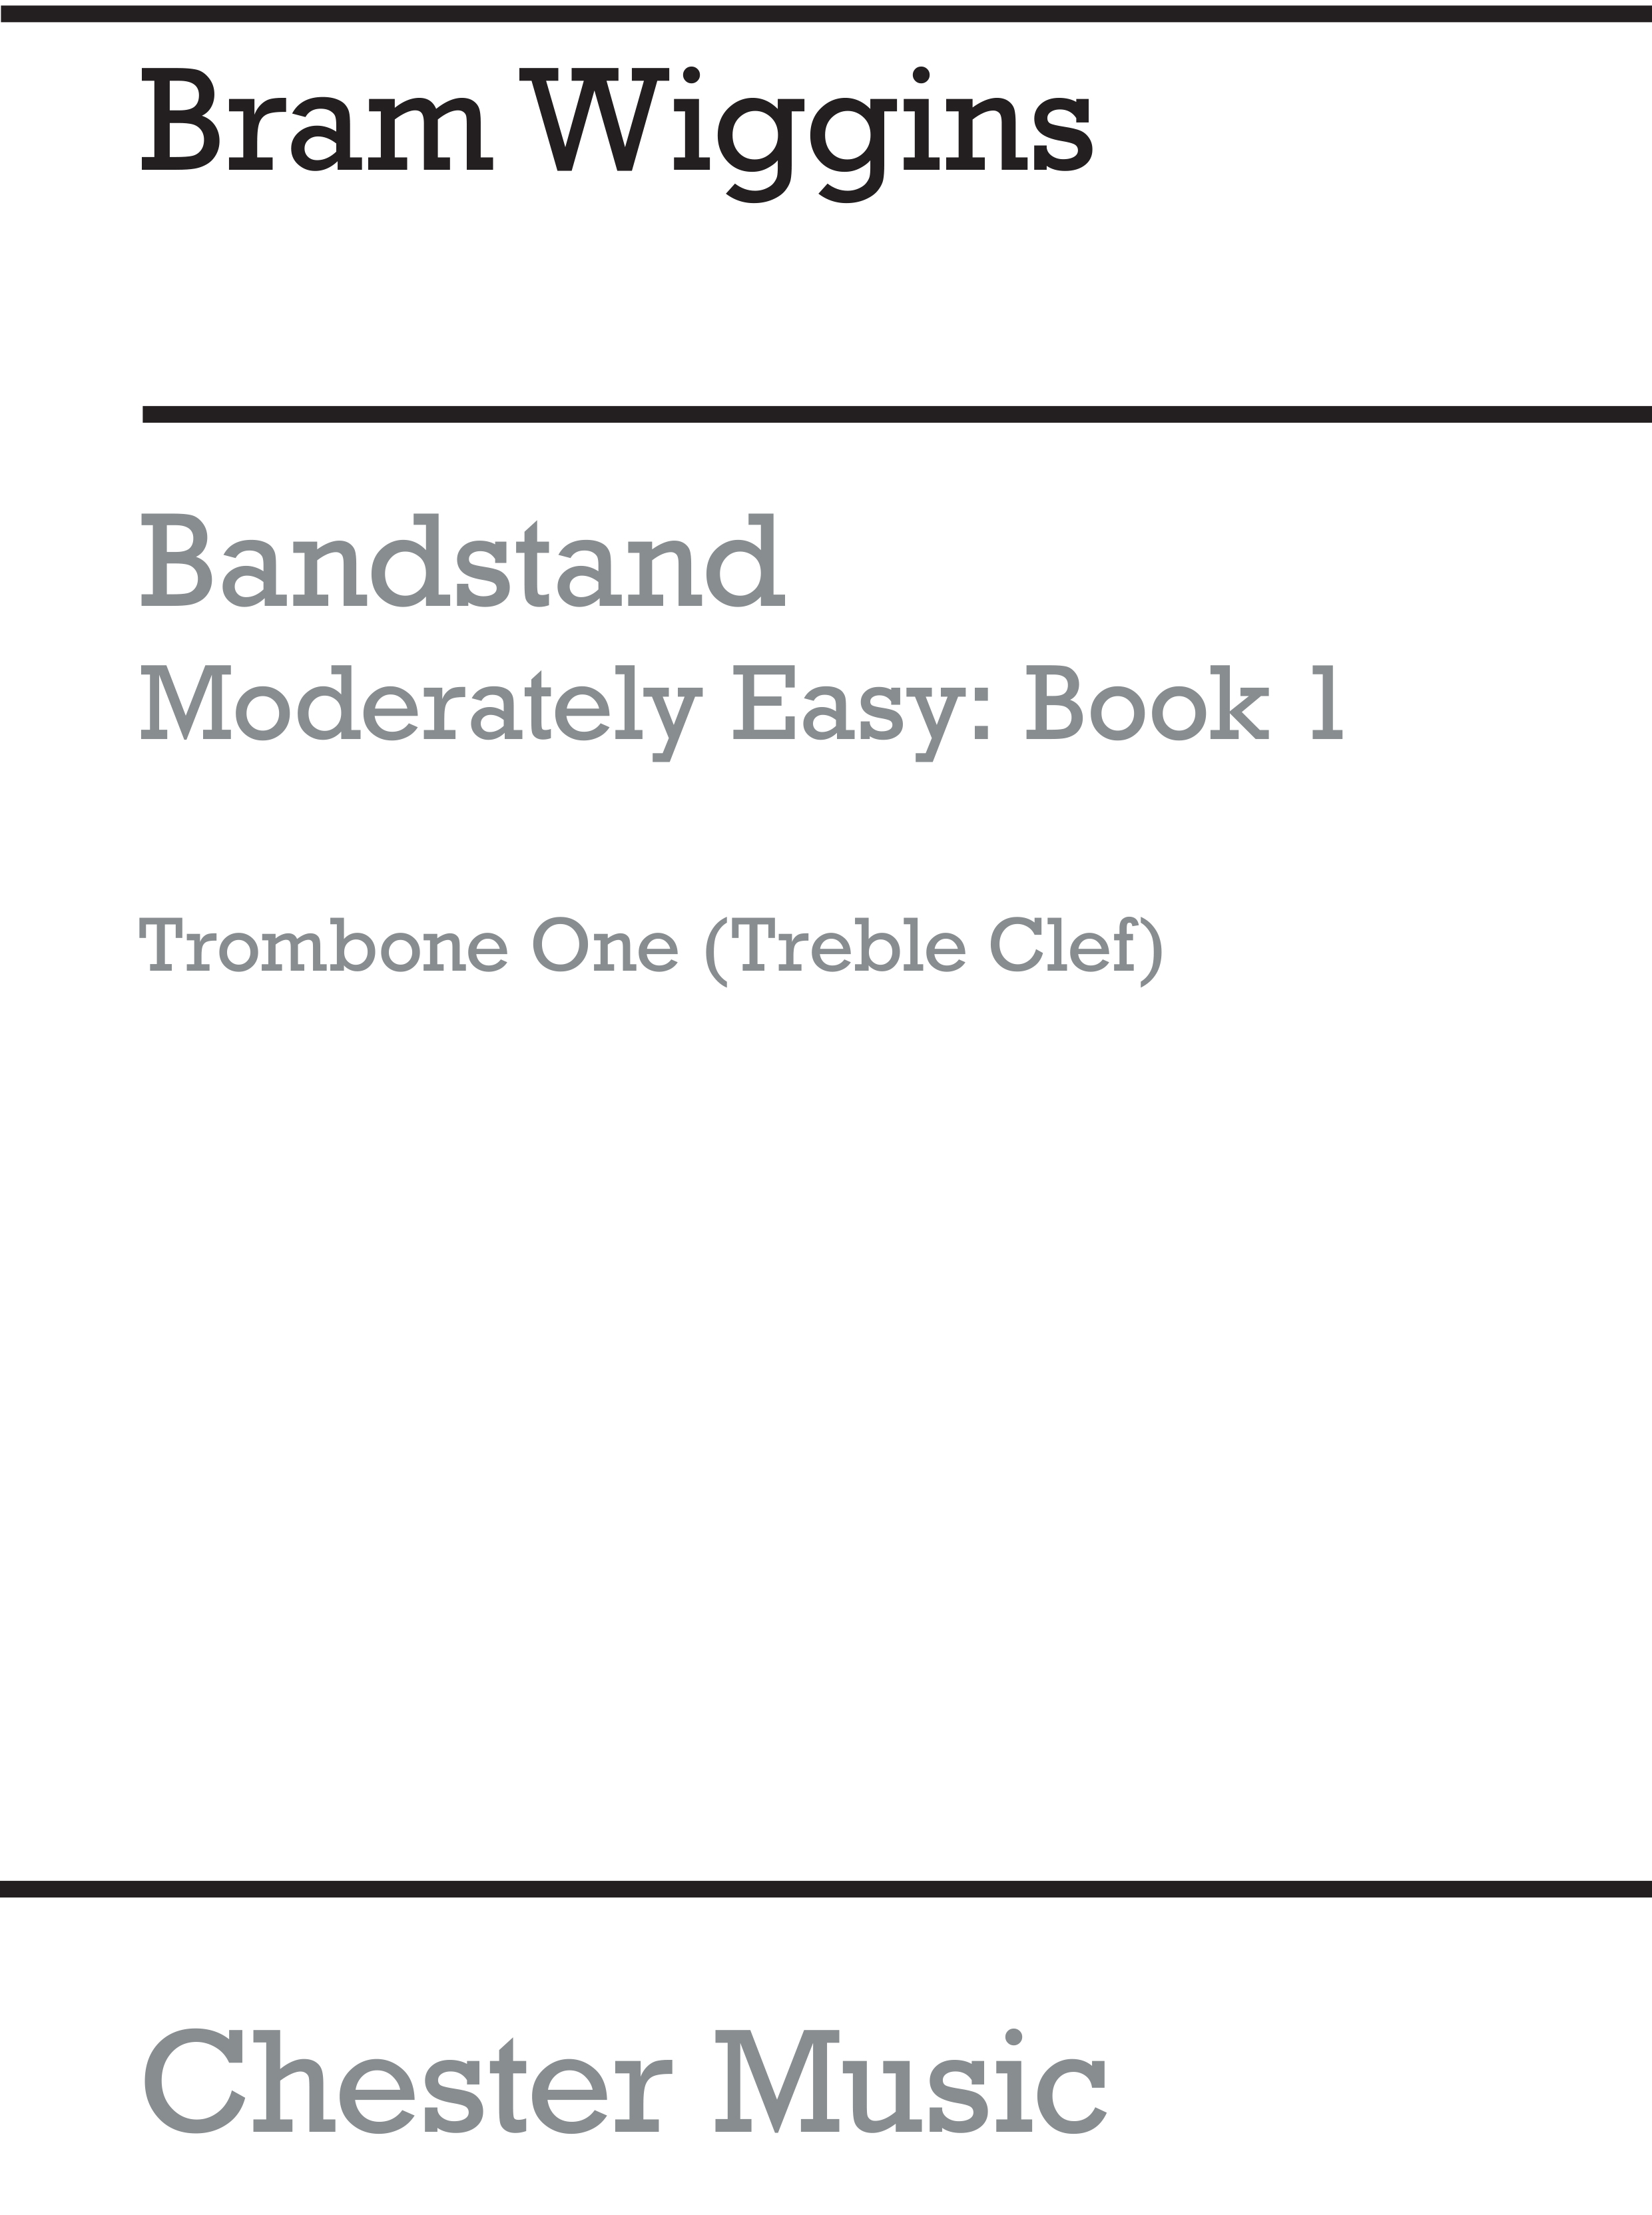 Bram Wiggins: Bandstand Moderately Easy Book 1 (Trombone 1 TC): Concert Band: